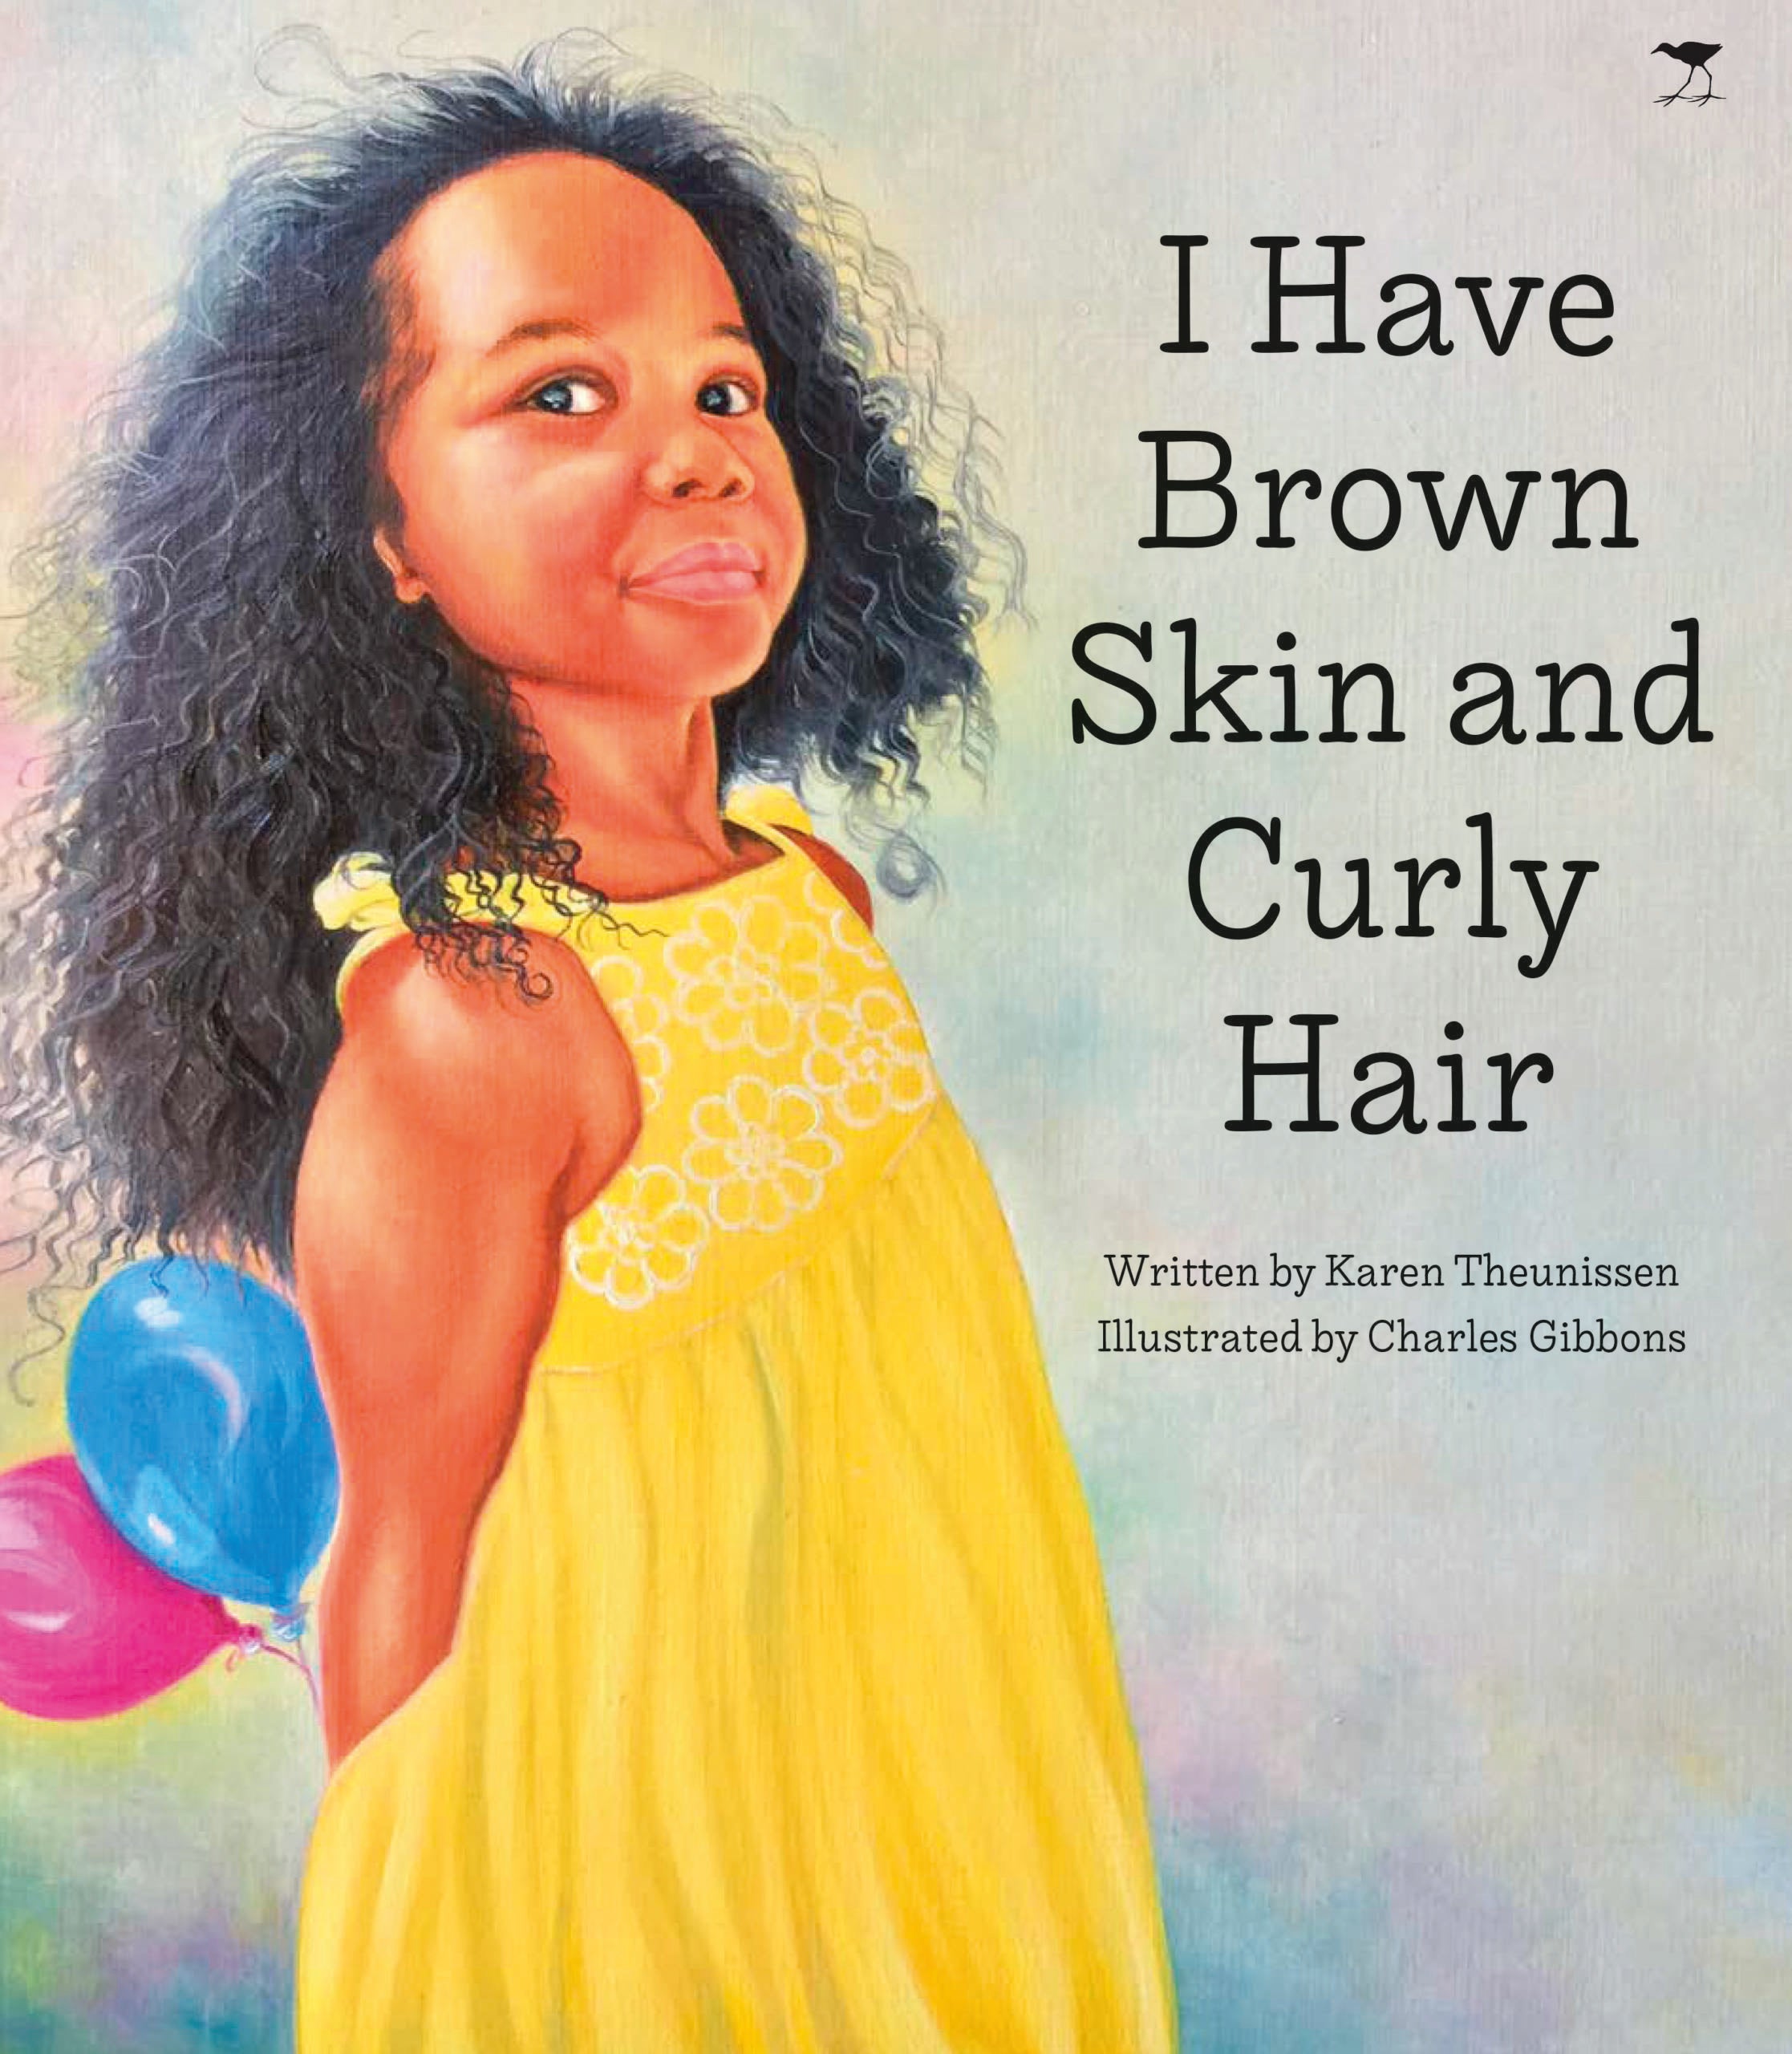 I HAVE BROWN SKIN AND CURLY HAIR